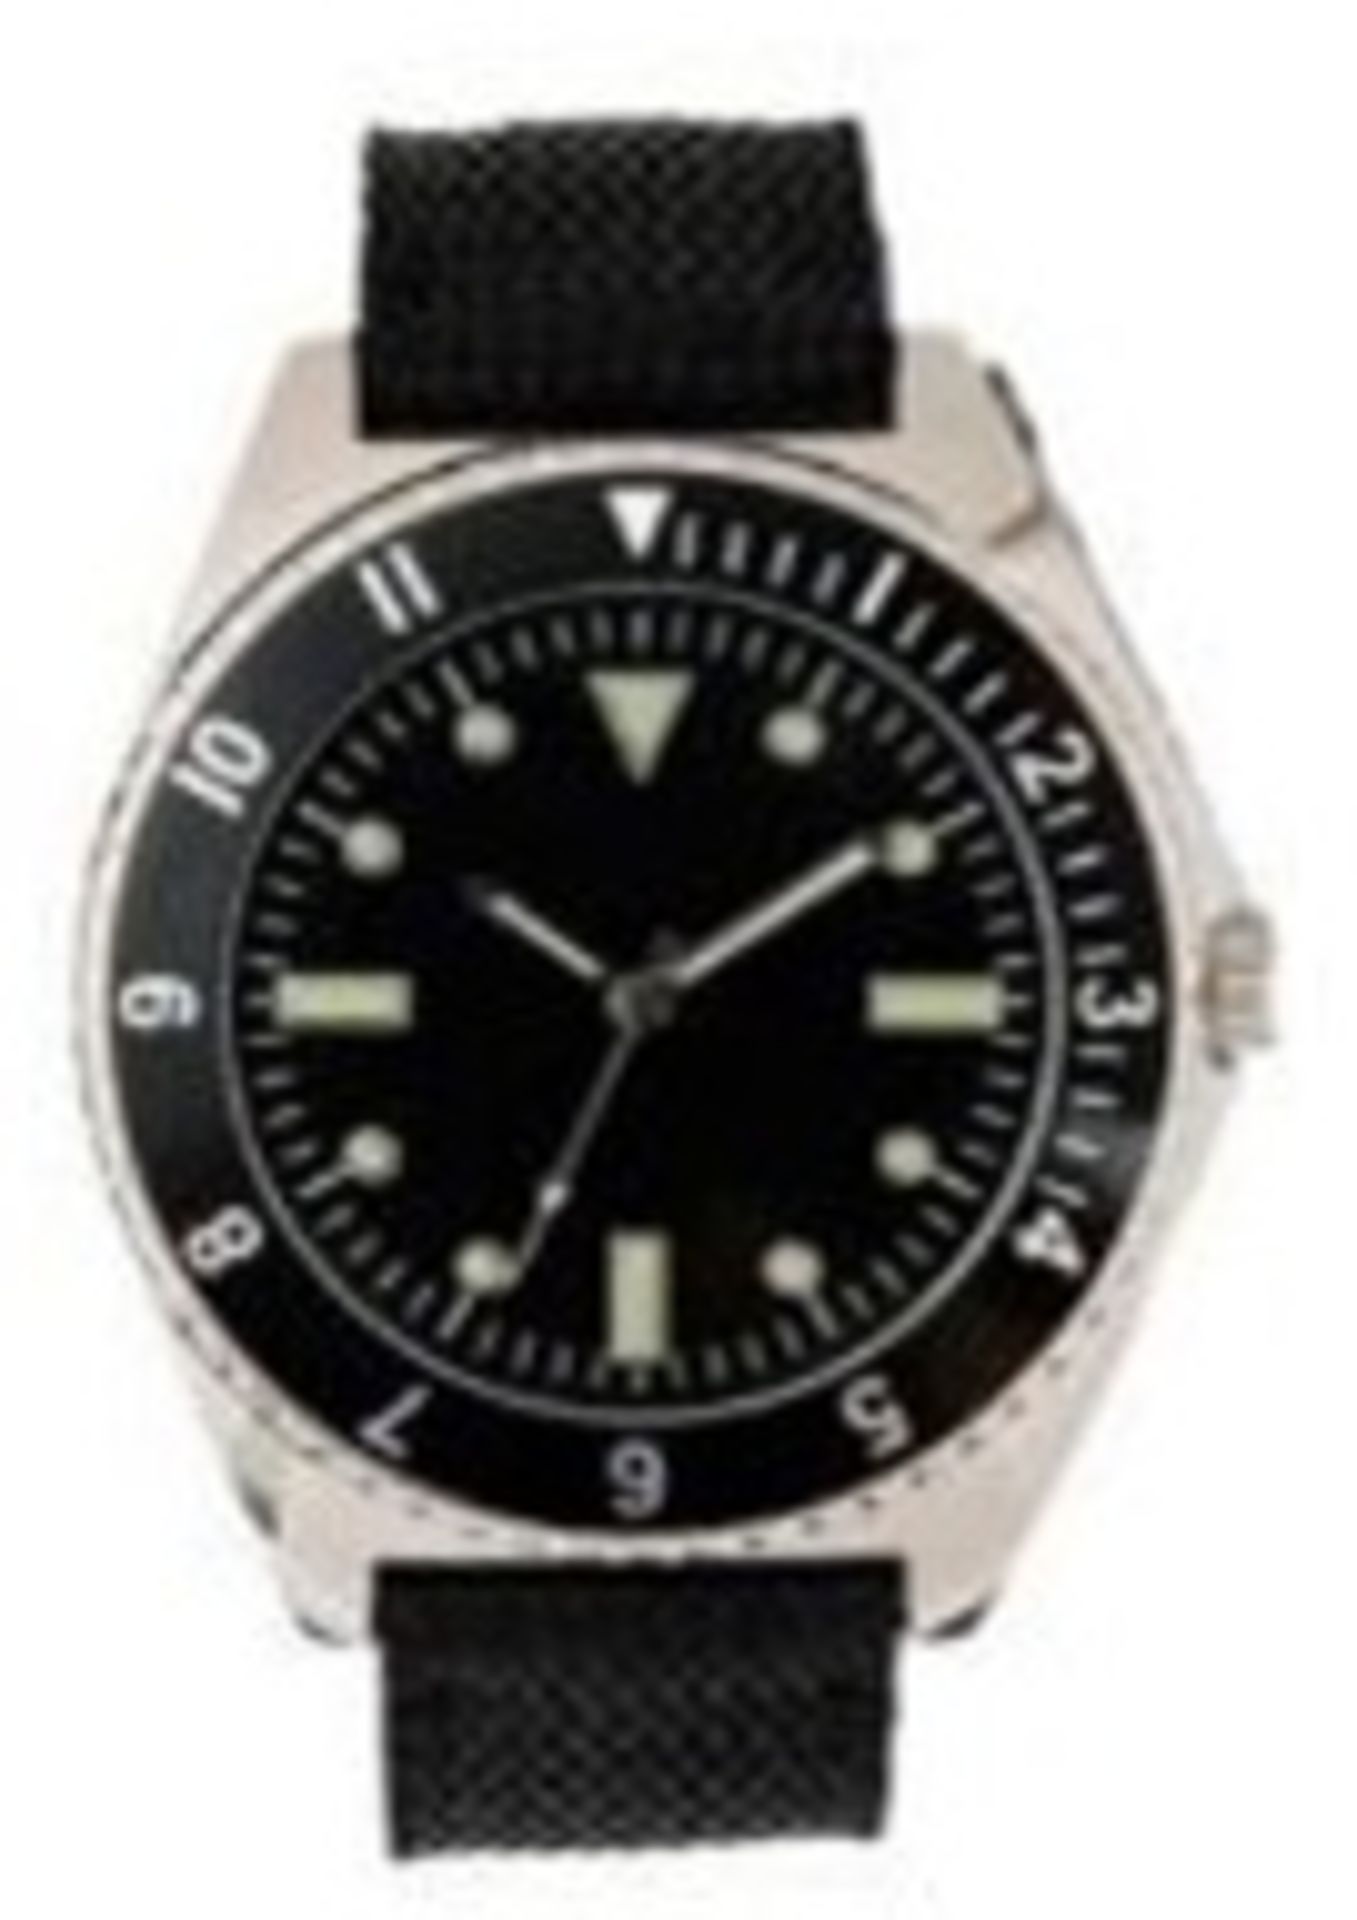 + VAT Brand New Gents 1970s US Navy Diver Watch with Engraved Back in Presentation Box